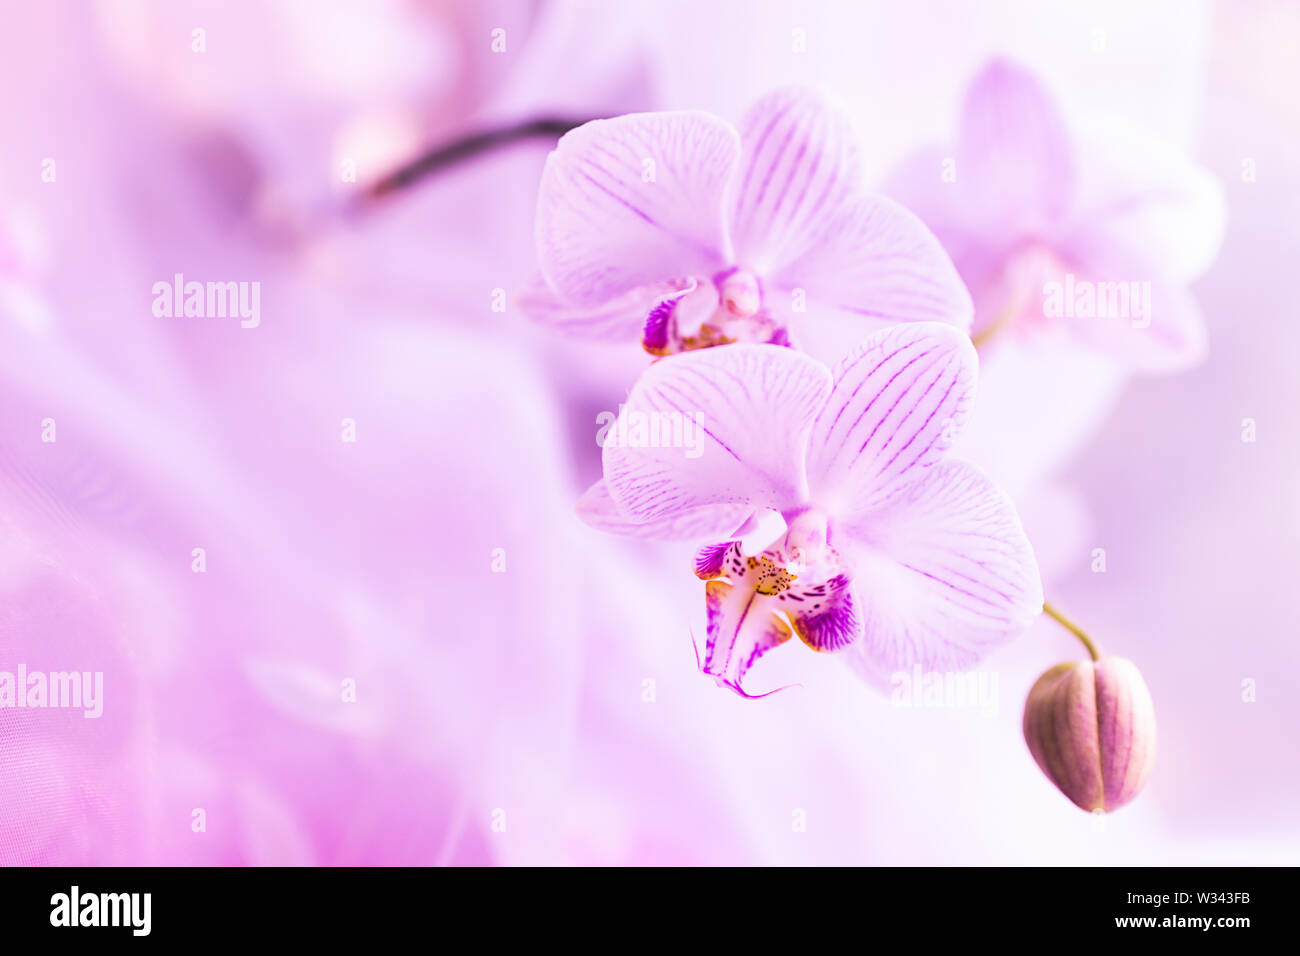 A flower of magnificent pink orchid close up. Selective focus. Horizontal frame. Fresh flowers natural background macro. Stock Photo